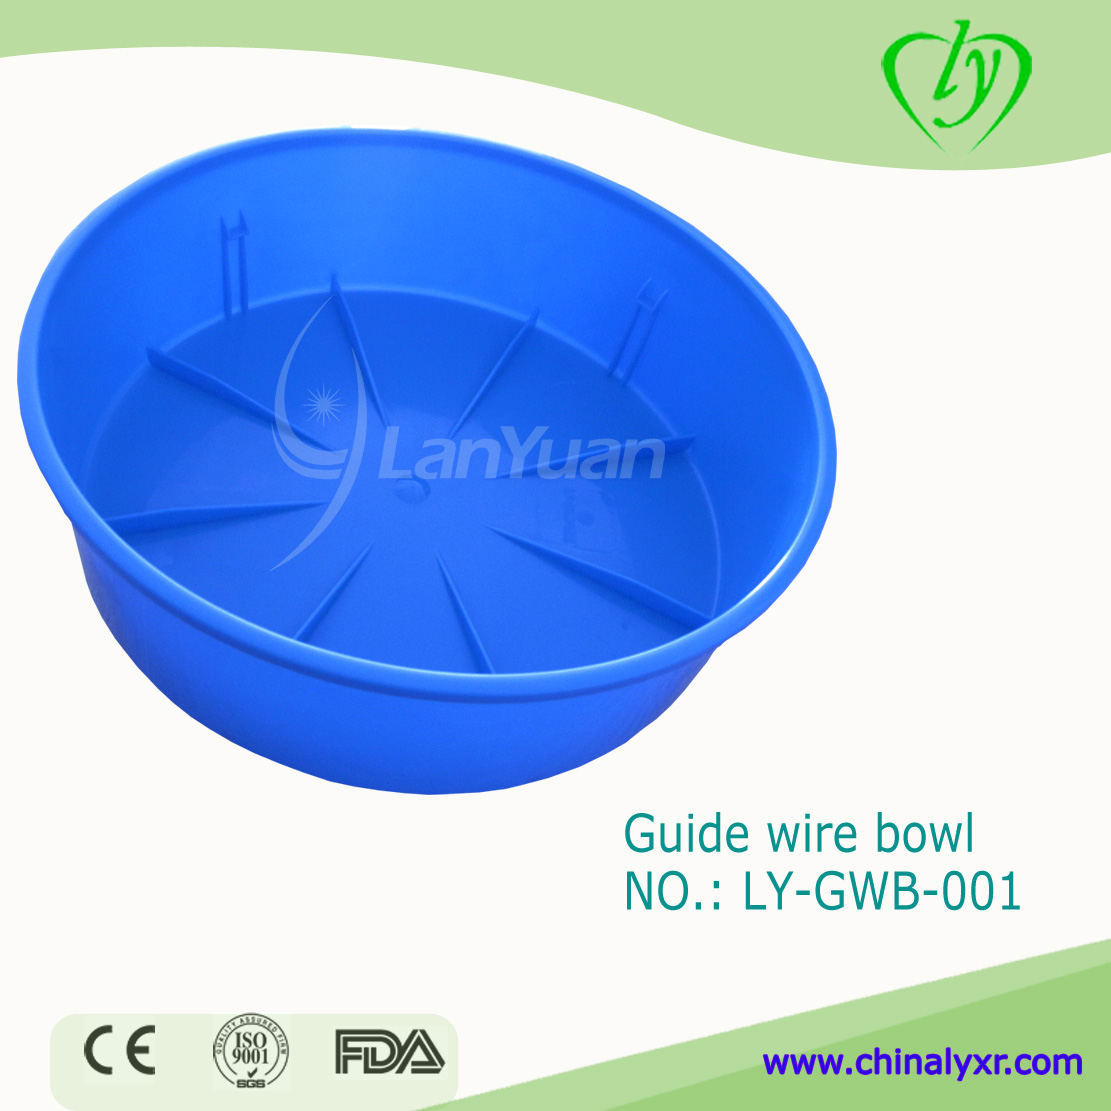 Blue Disposable Surgical Guide Wire Bowl